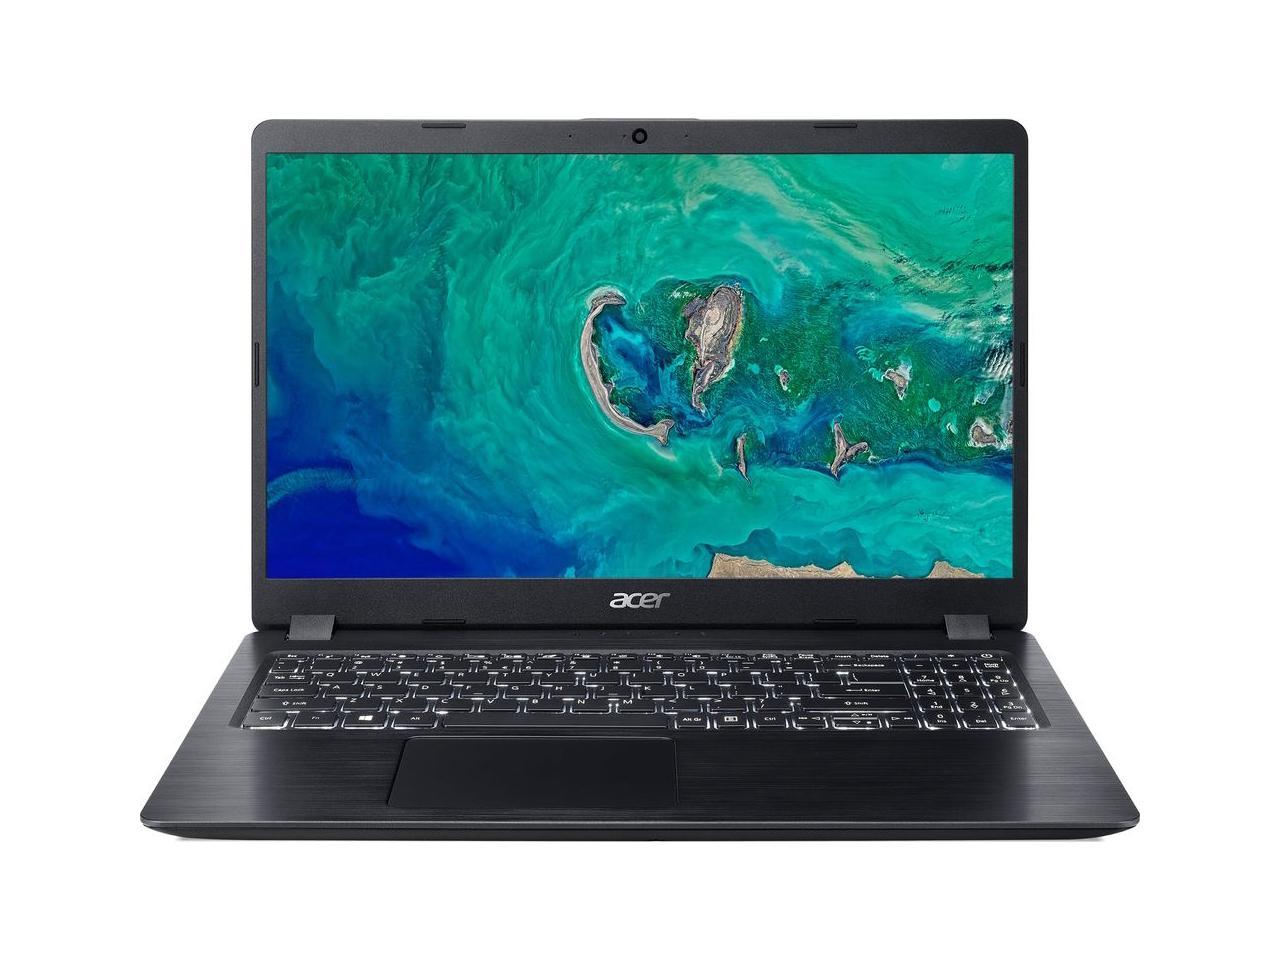 Acer Aspire 3 Laptop AMD A-Series A9-9420E 1.80GHz 12GB Ram 1TB HDD Win 10 Home